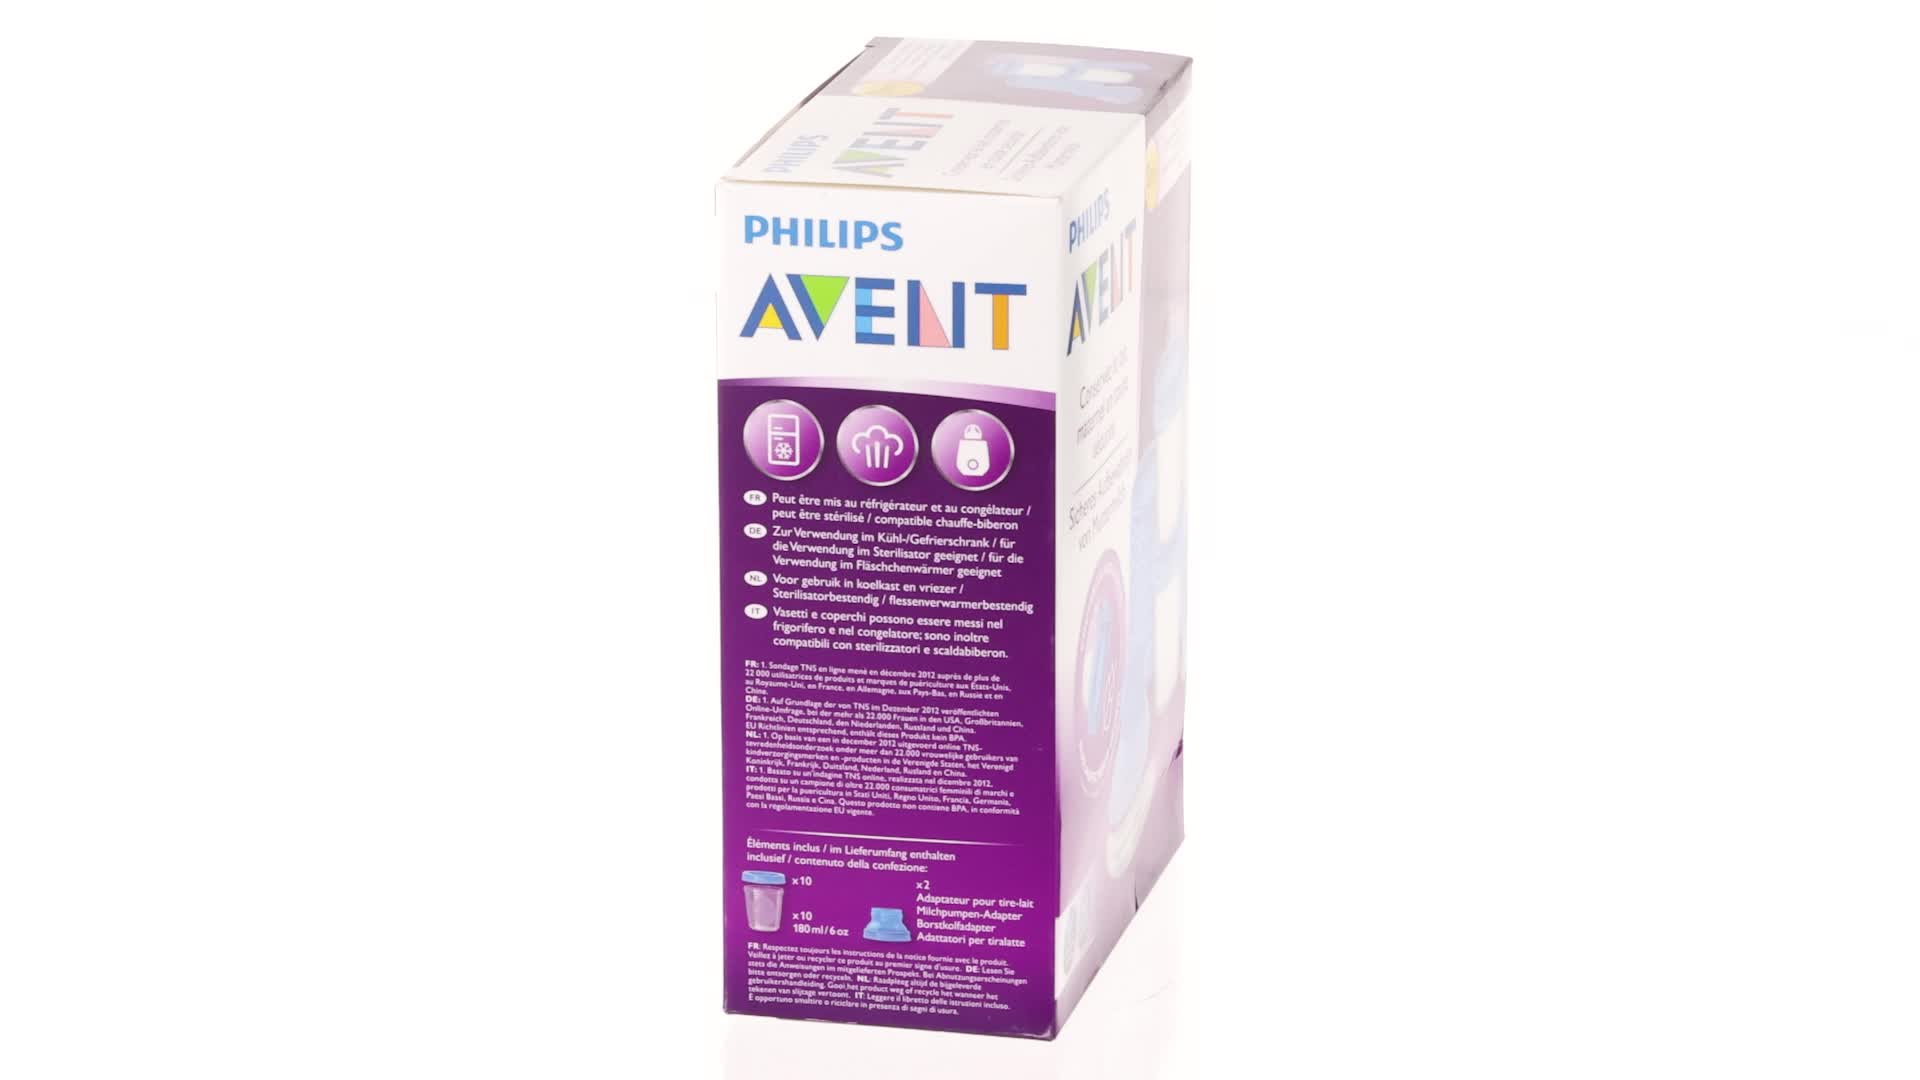 Philips Avent Reusable Breast Milk Storage Cups (10 x 180 ml) - Baby Bliss